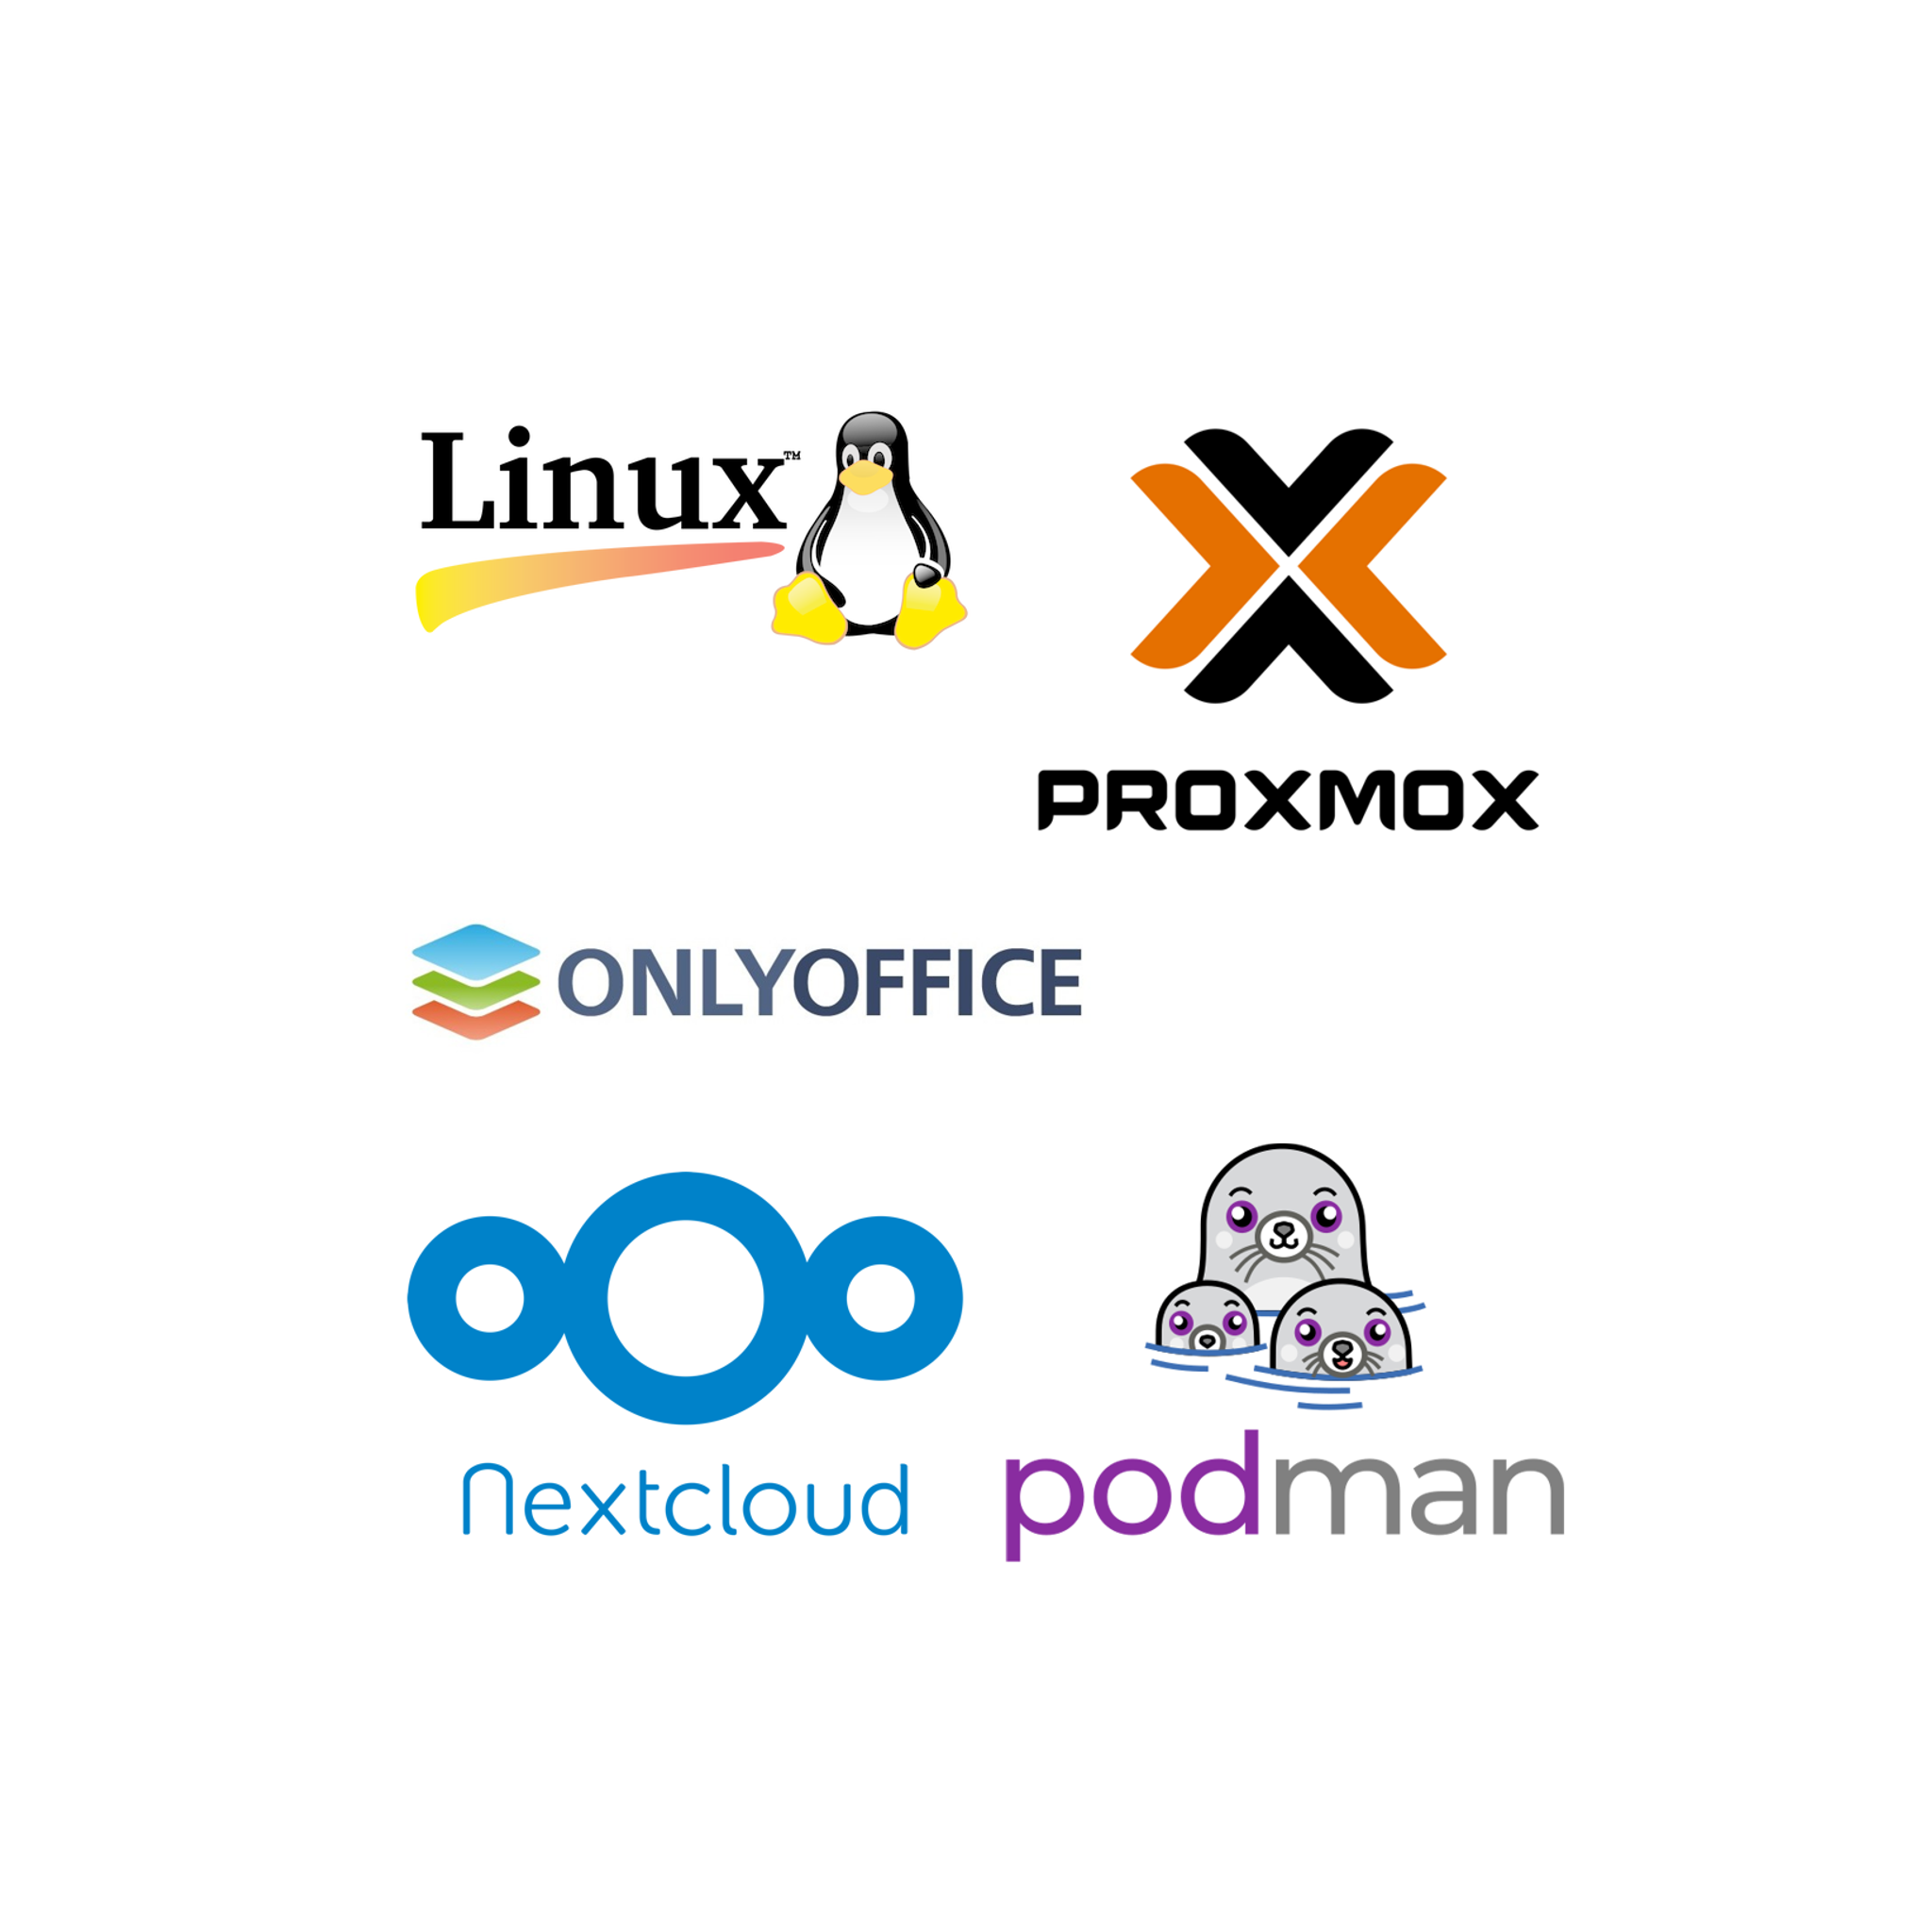 We strive in the use of technologies such as Proxmox, Nextcloud, Linux and OnlyOffice